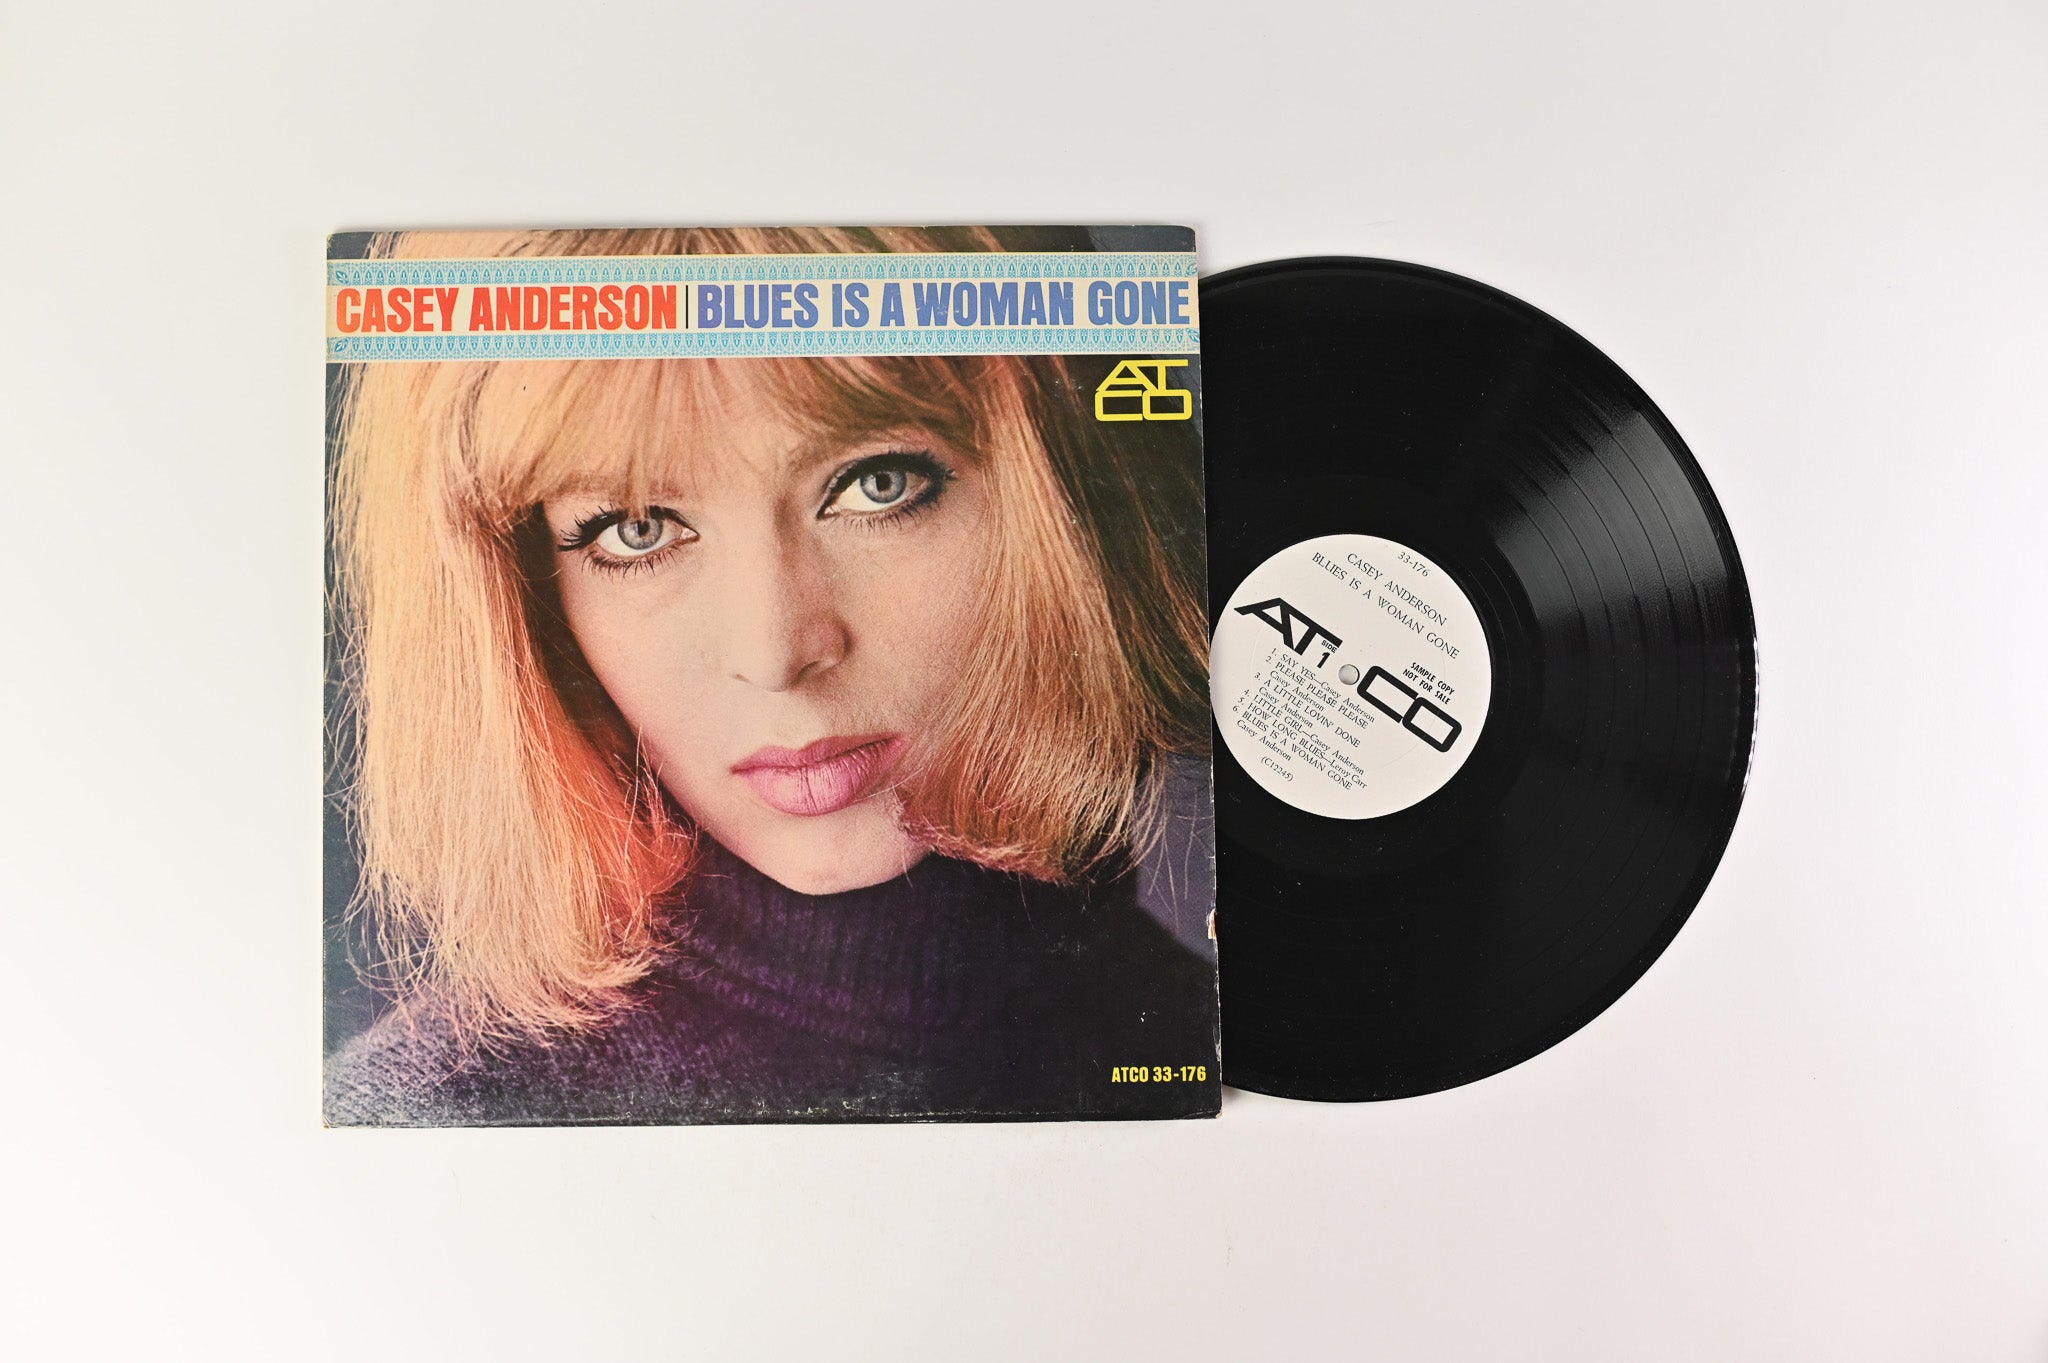 Casey Anderson - Blues Is A Woman Gone on Atco - Mono Promo